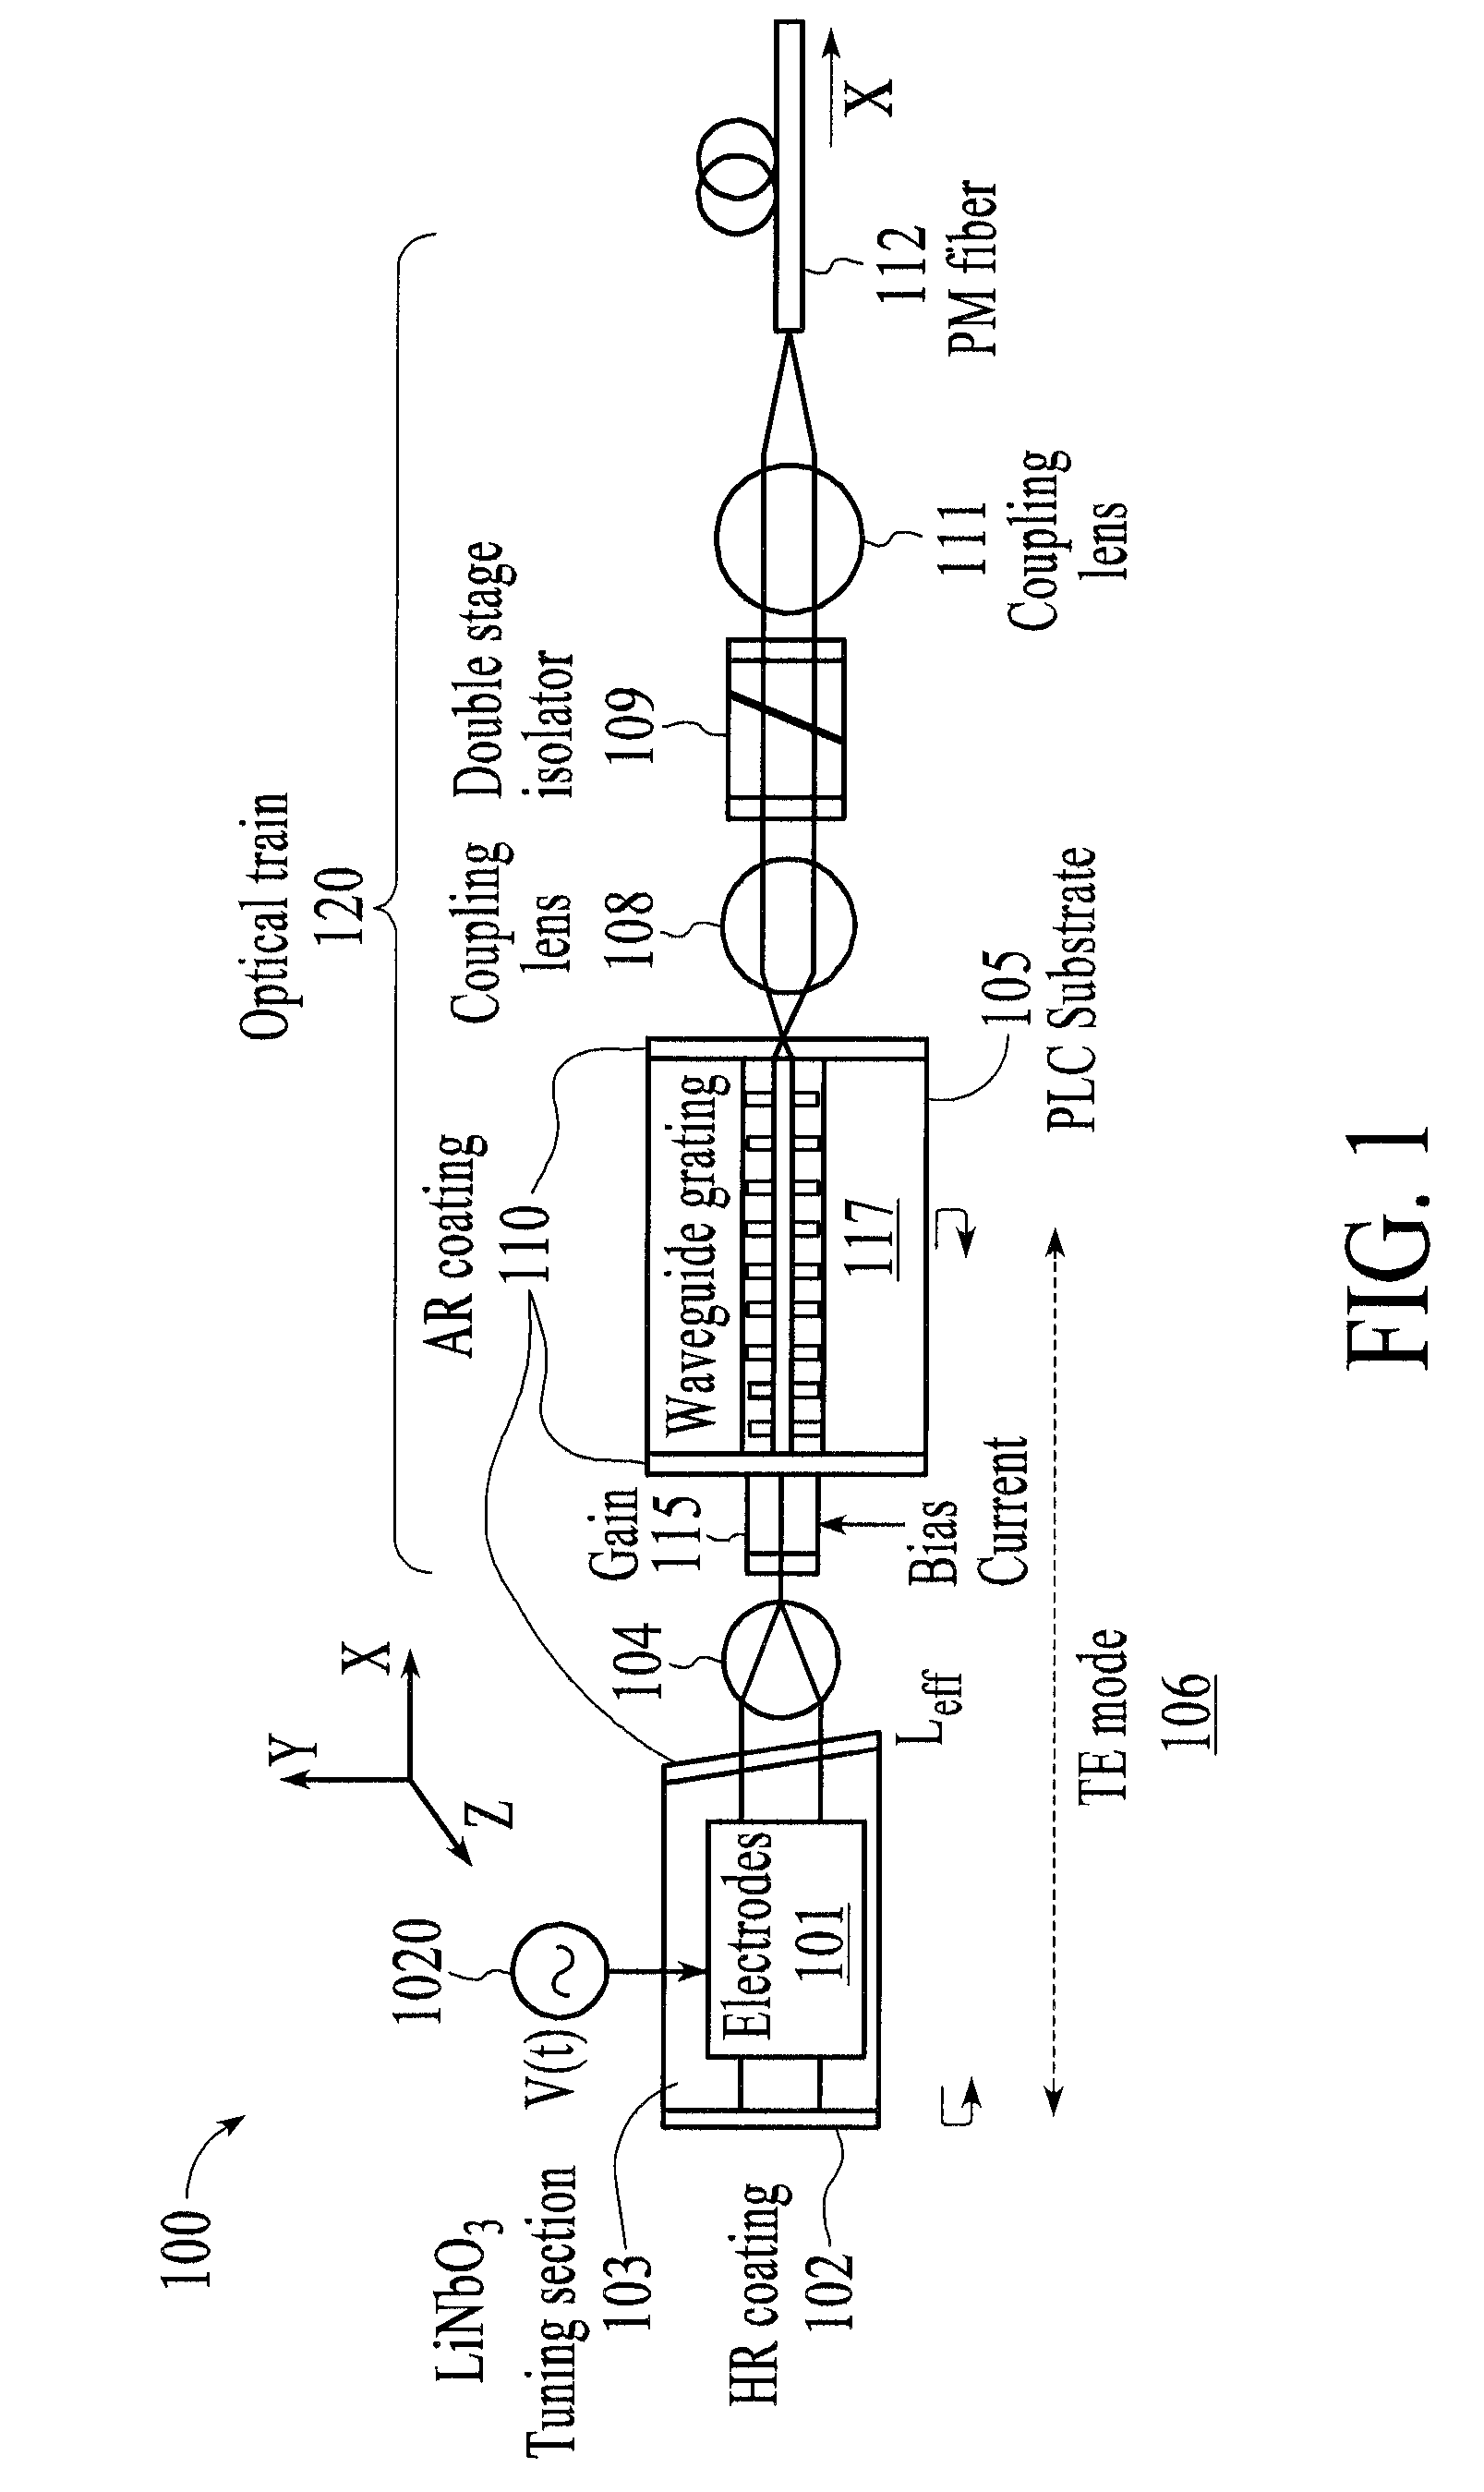 Semiconductor external cavity laser with integrated planar waveguide bragg grating and wide-bandwidth frequency modulation